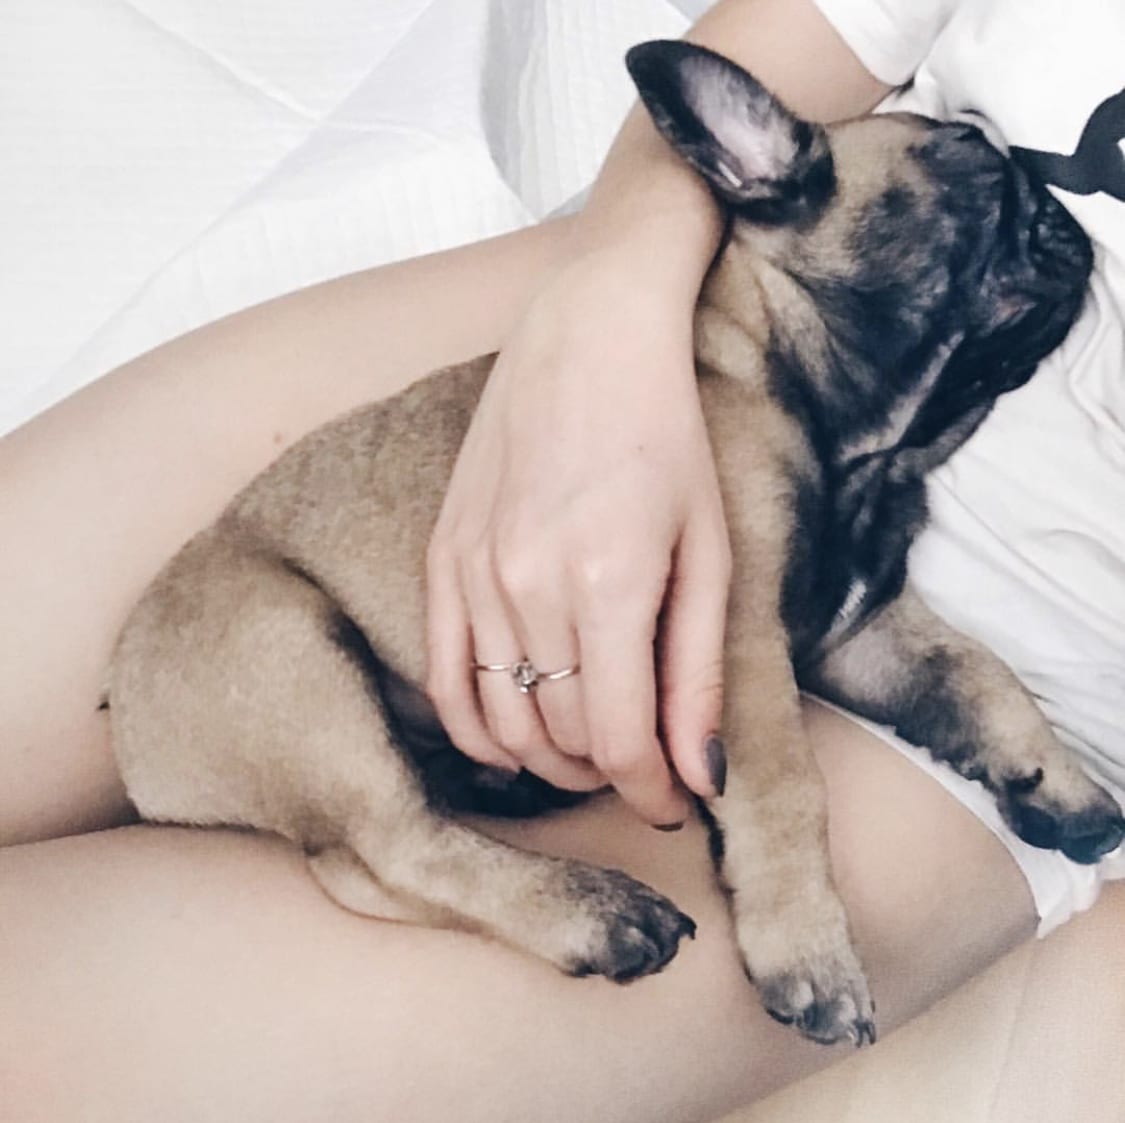 A French Bulldog sleeping on the lap of the woman